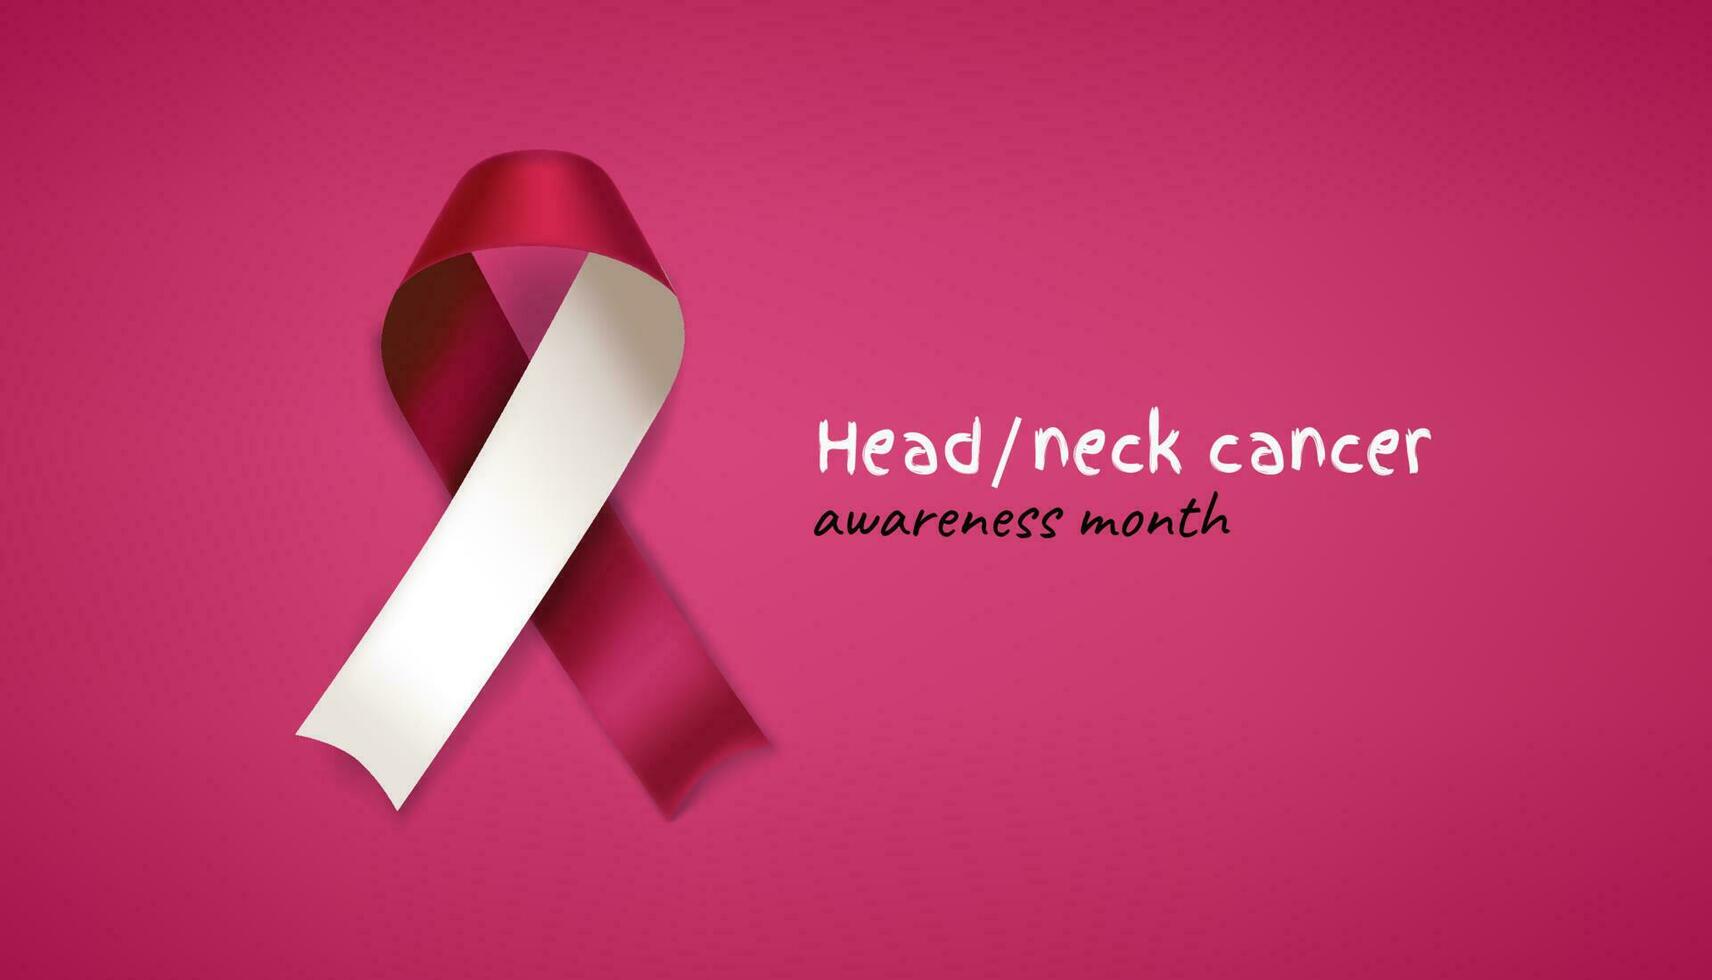 Head and neck cancer awareness month banner. Burgundy and ivory ribbon vector